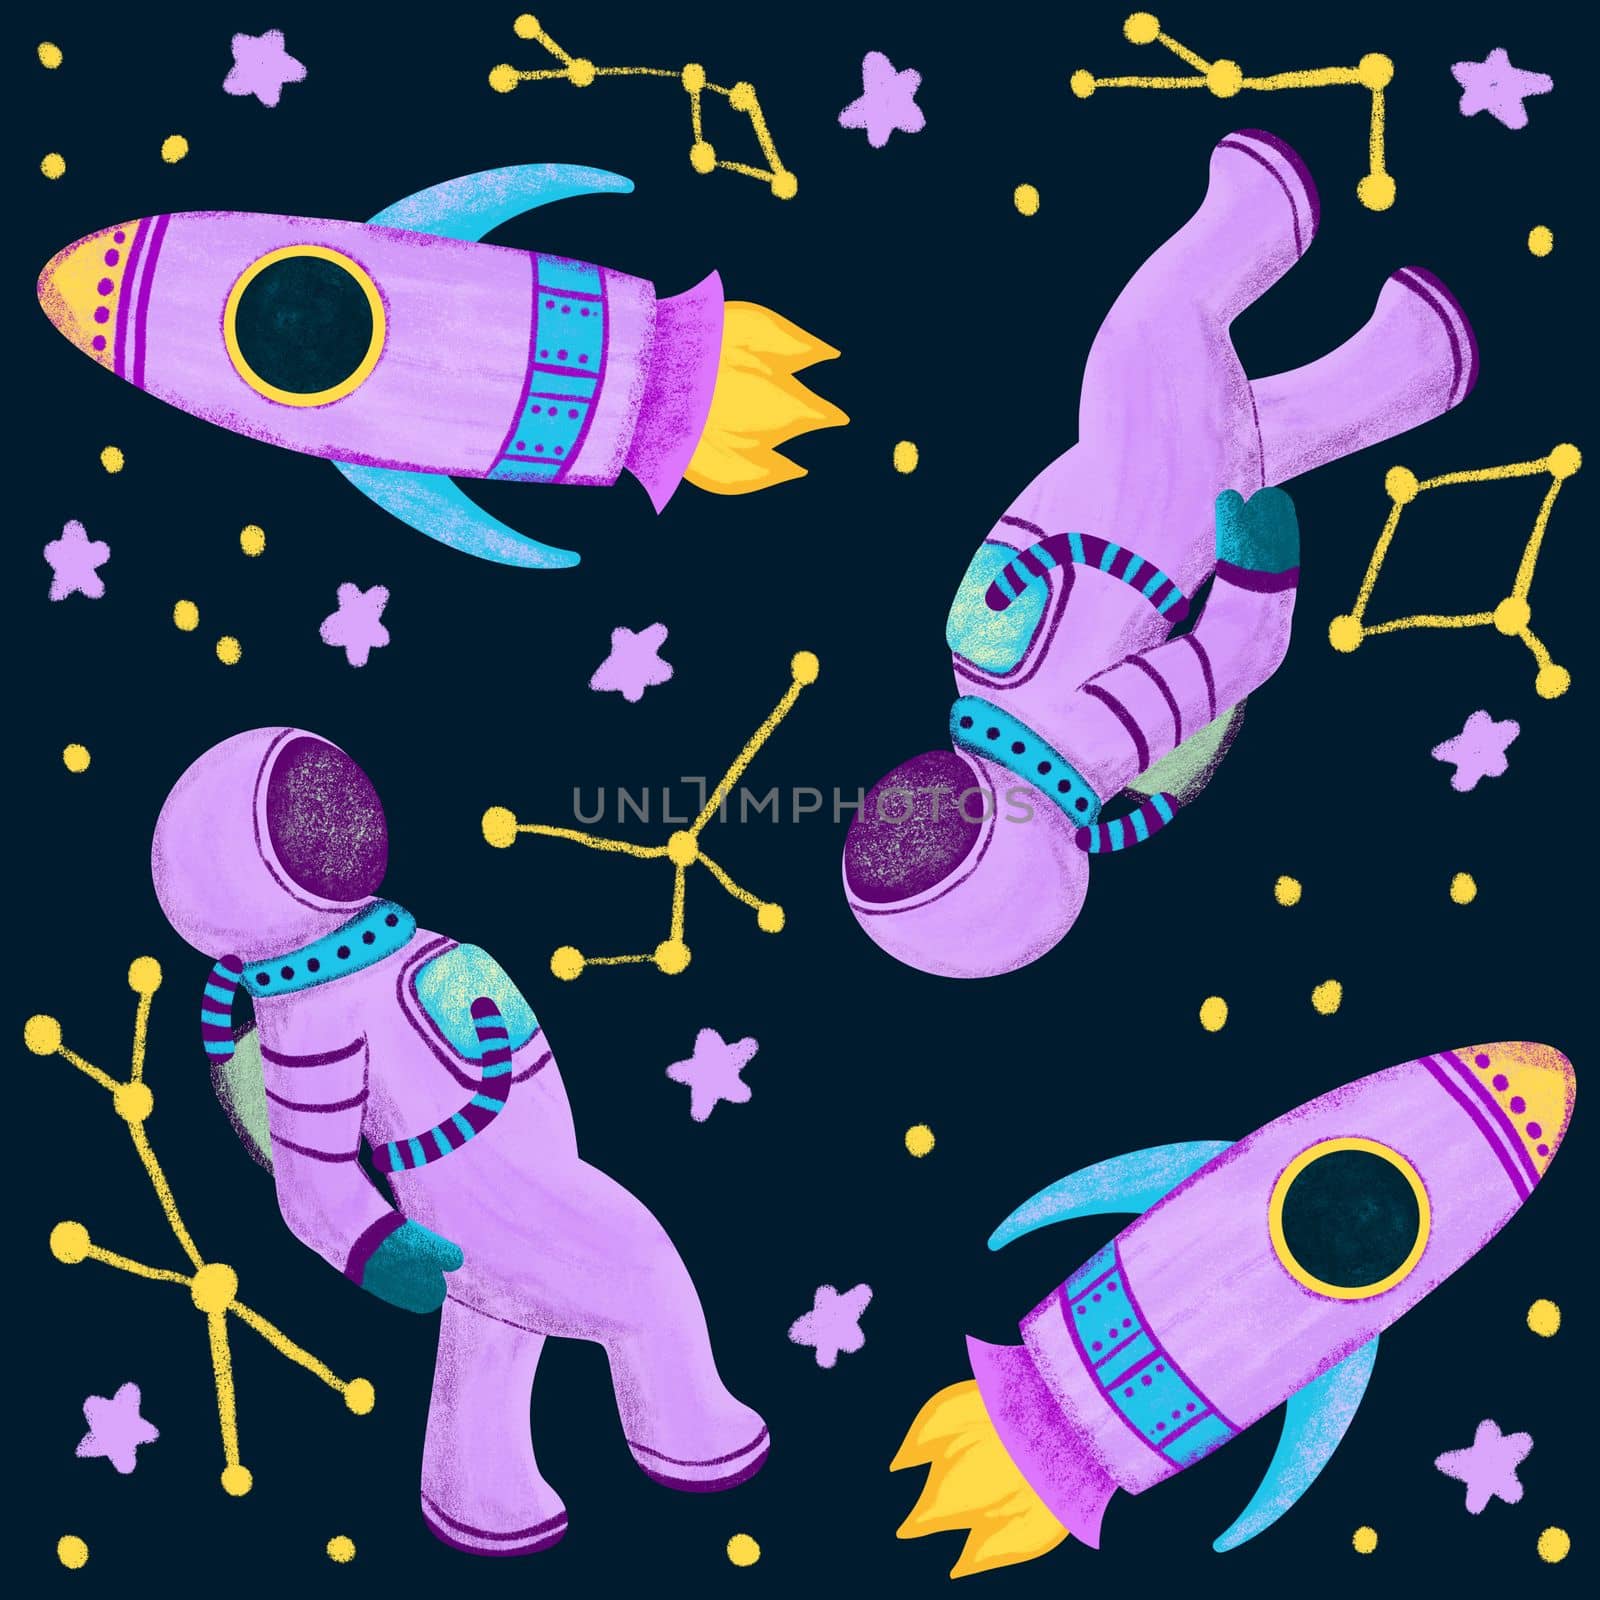 Hand drawn seamless pattern of outer space galaxy astronaut in purple blue colors. Stars planet asteroid comet saturn moon fabric print for boys nursery decoration spaceship alien ship art. by Lagmar